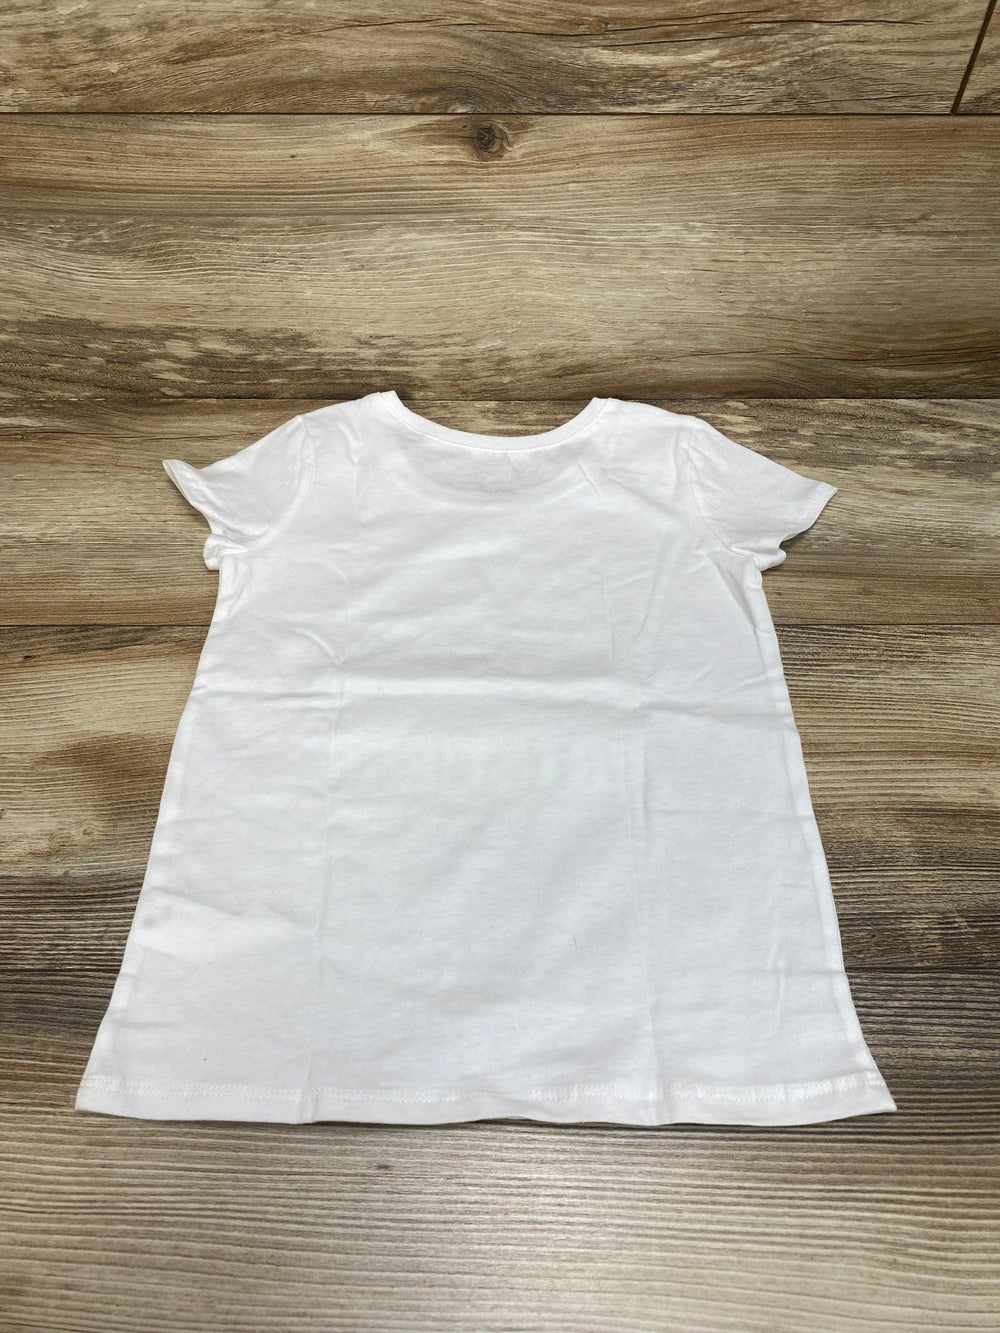 NEW Children's Place White Birthday Princess Shirt sz 5T - Me 'n Mommy To Be